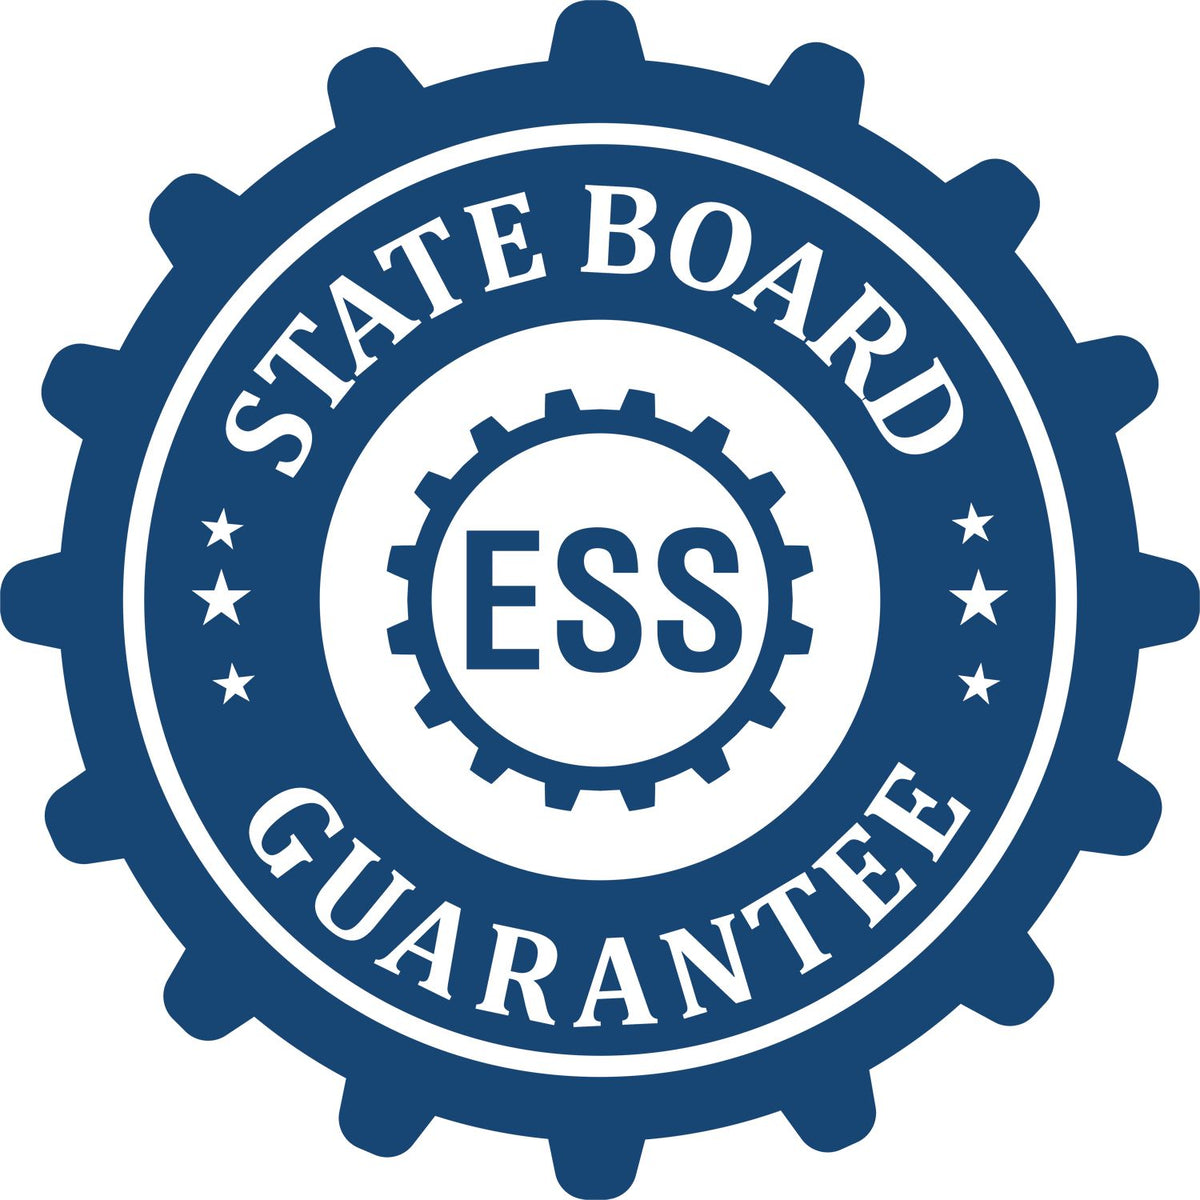 An emblem in a gear shape illustrating a state board guarantee for the Hybrid Arizona Land Surveyor Seal